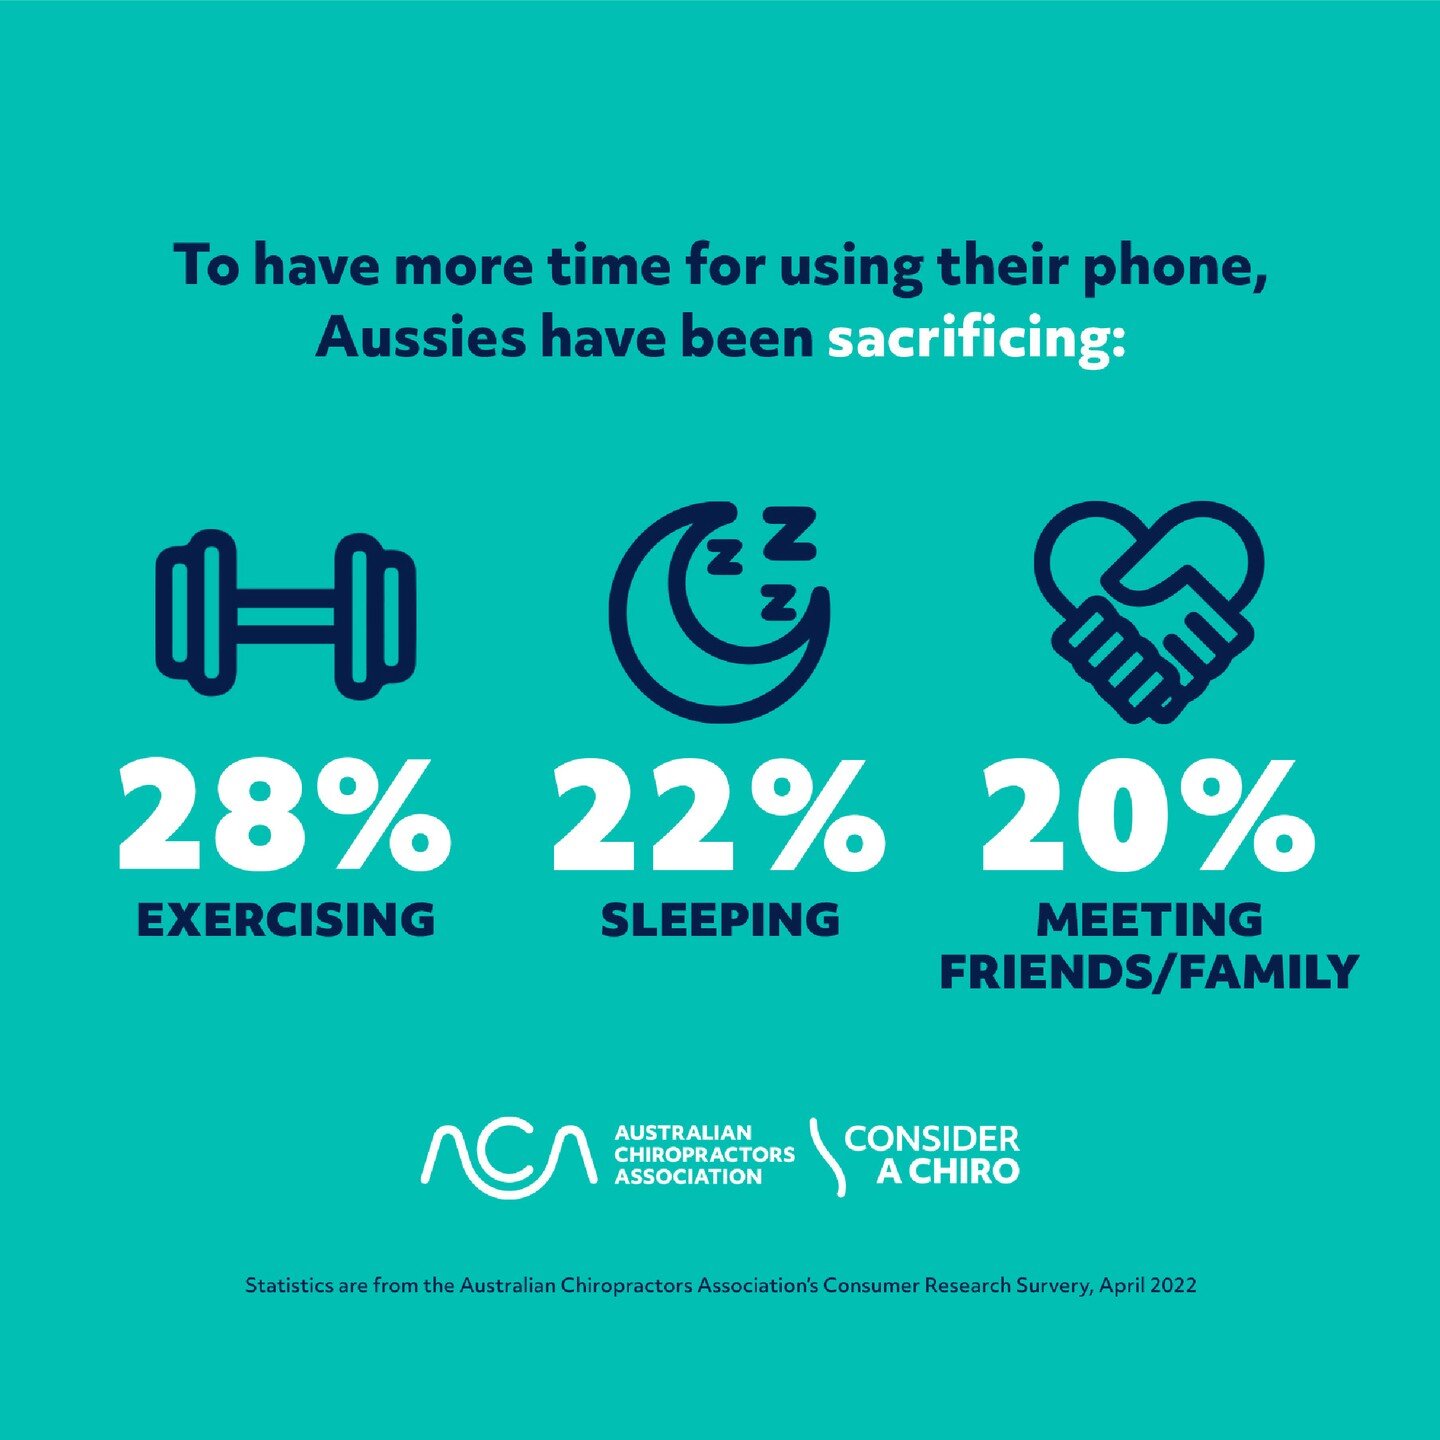 If you put your phone down right now, you'd have abs by Christmas. 
#nophonesathetable #spinalhealth #sleepmorestressless